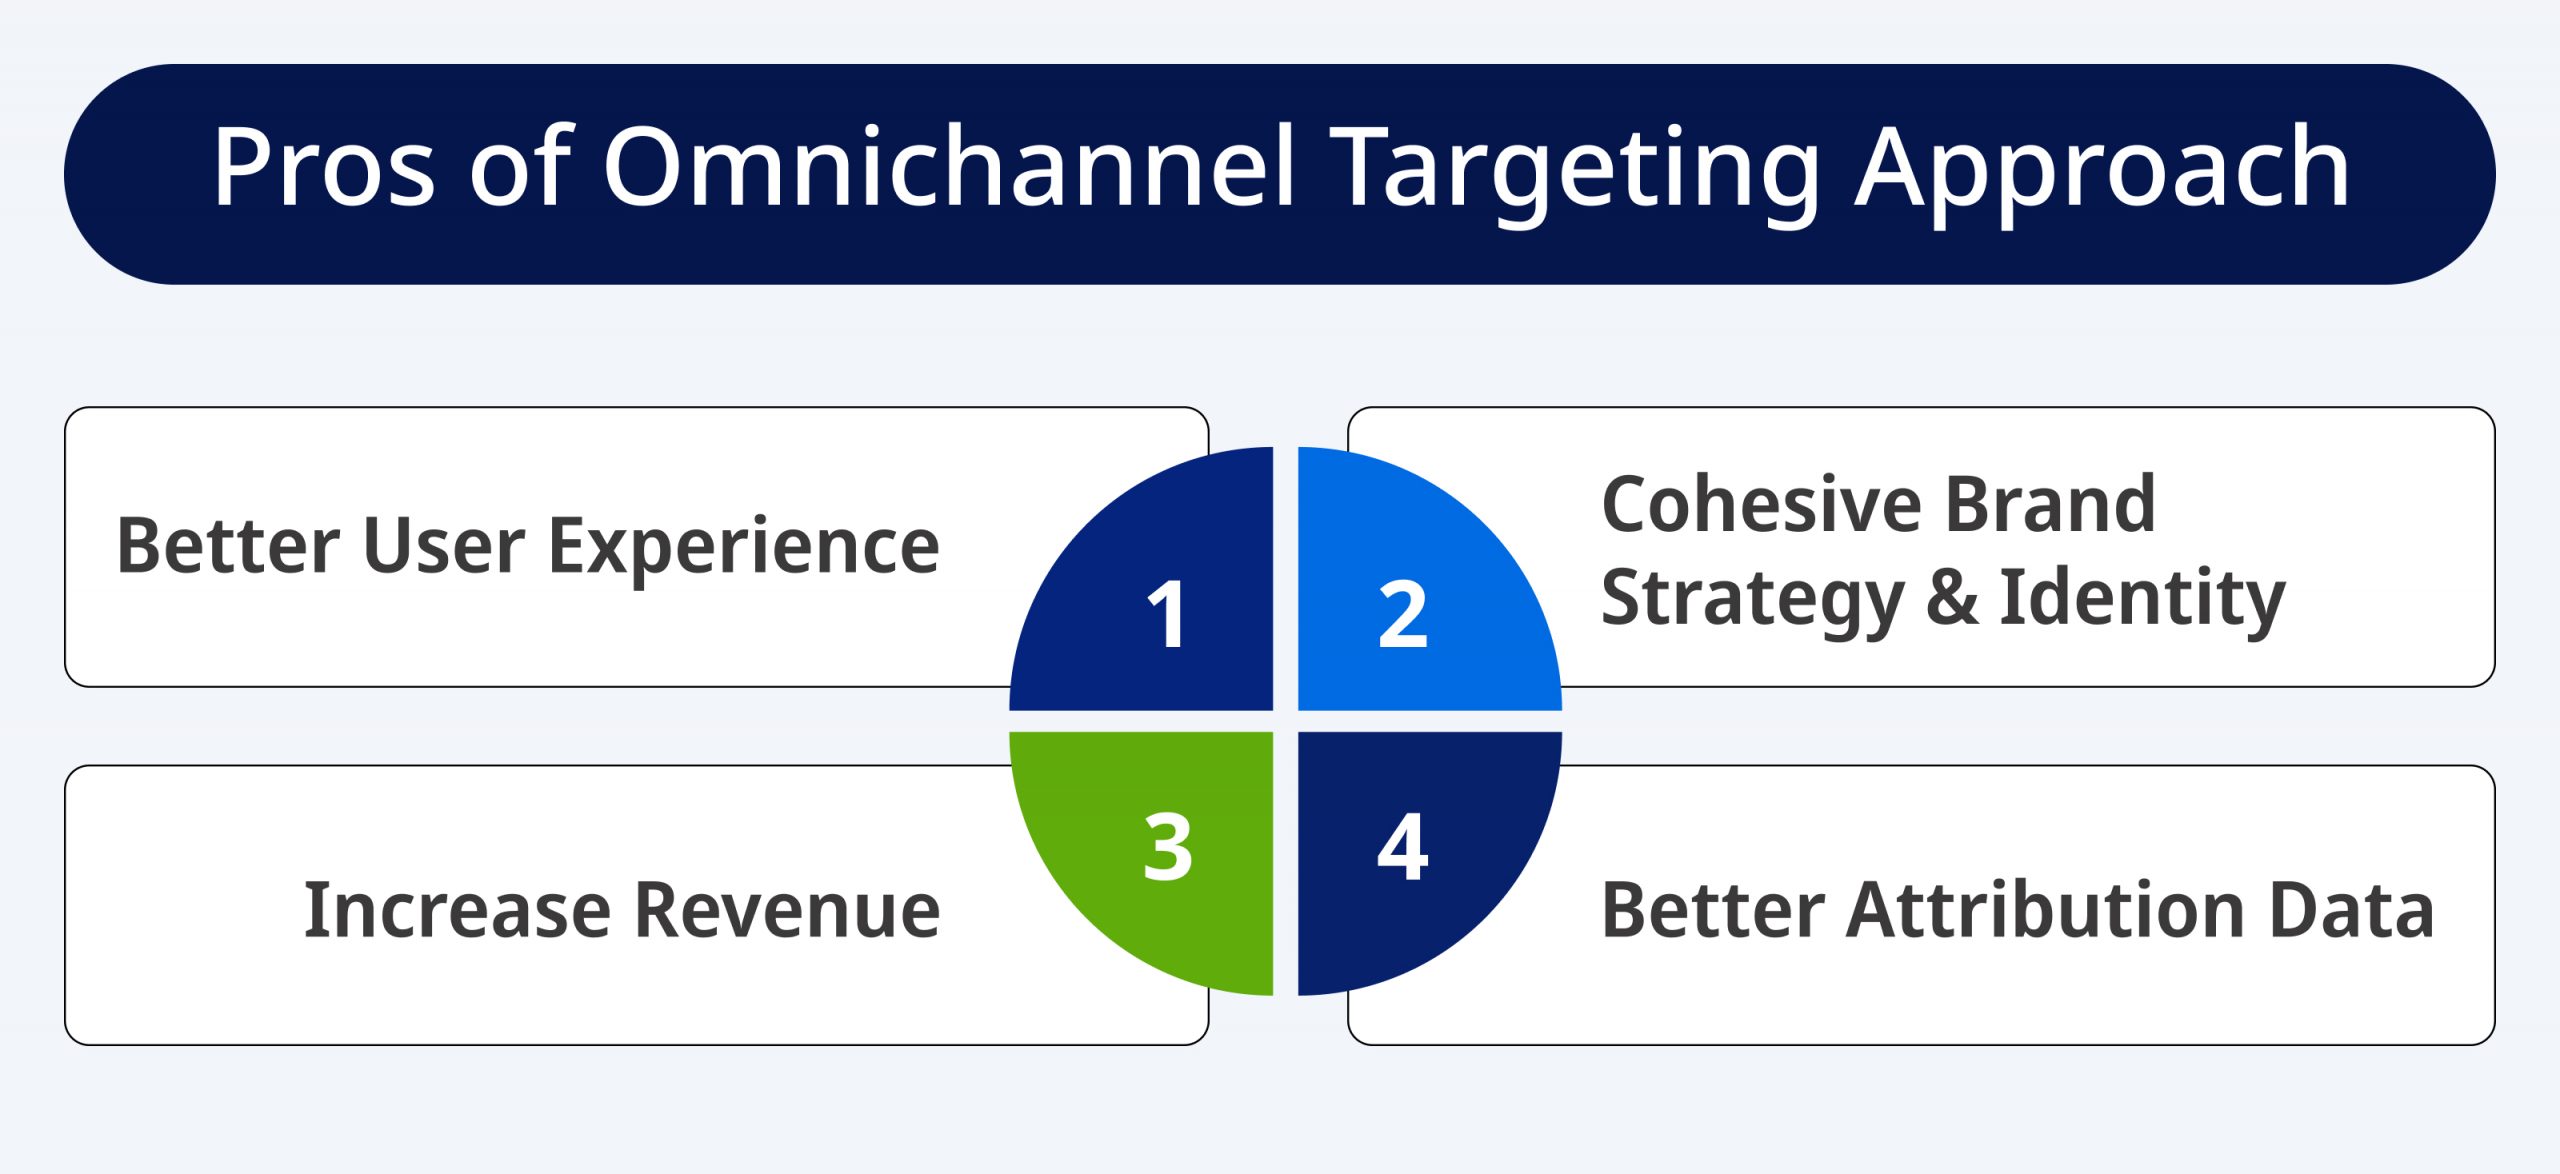 Pros of Omnichannel Targeting Approach